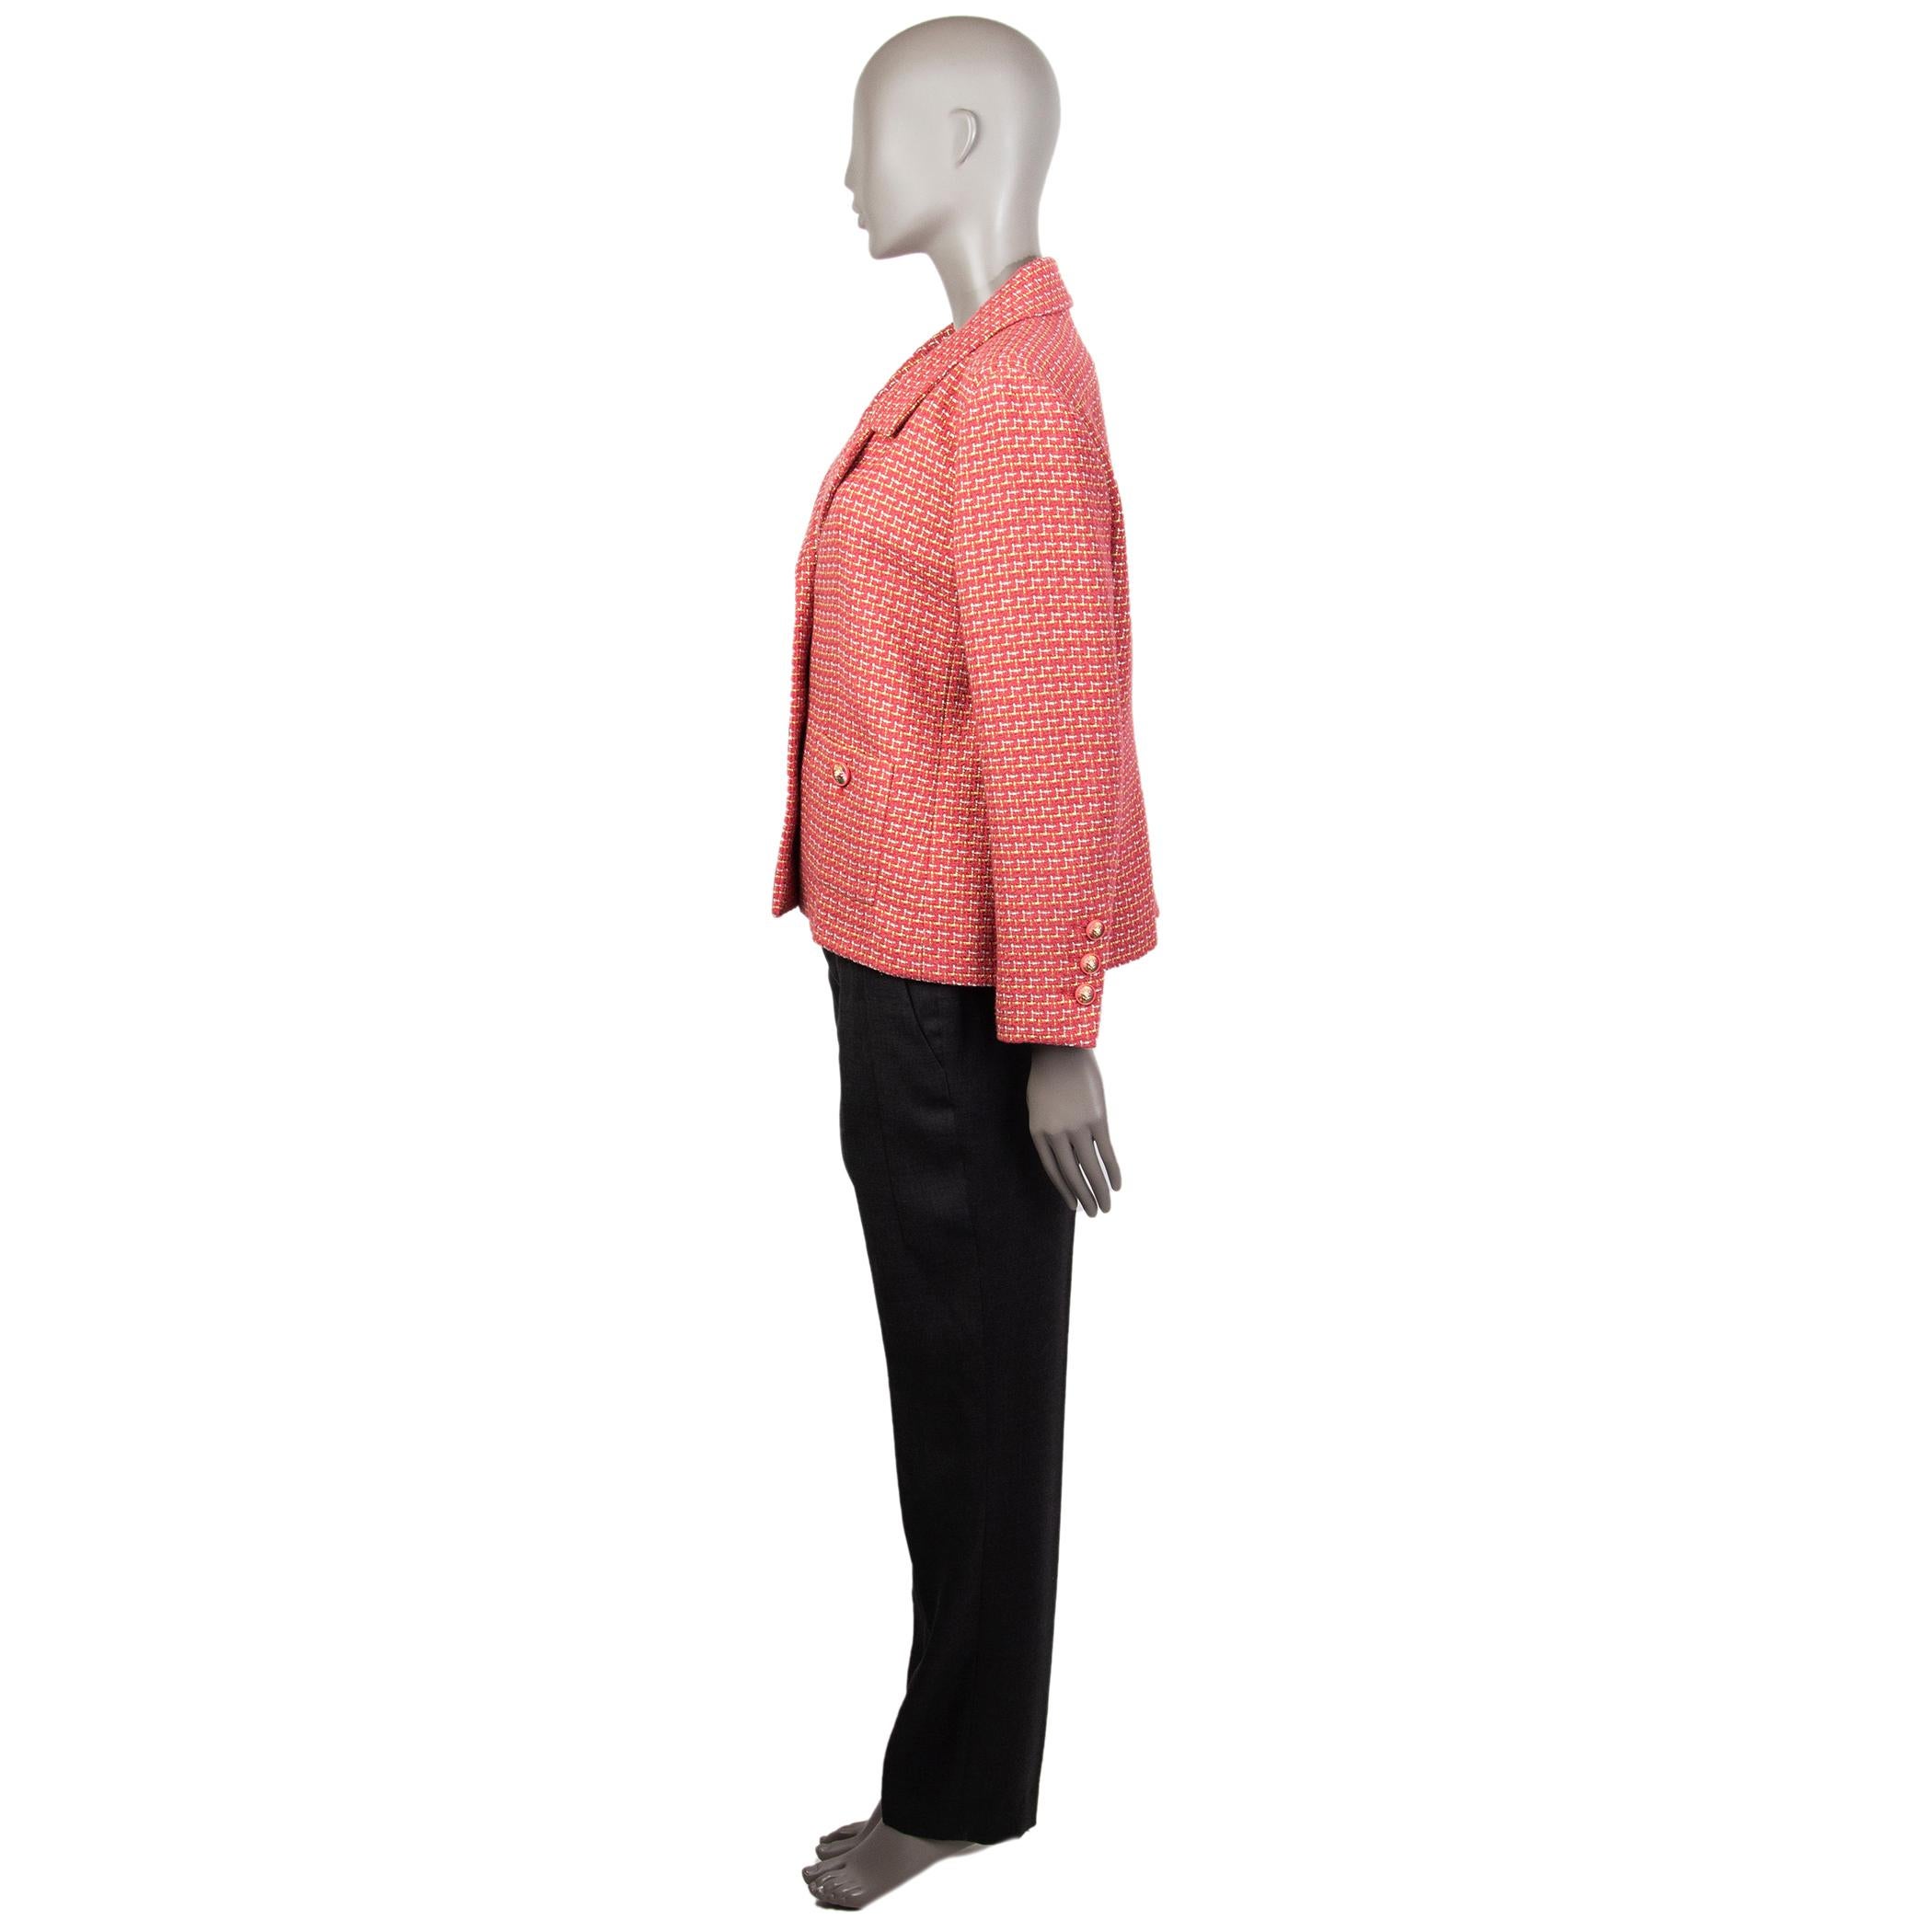 Chanel tweed blazer in watermelon, lime, silver, and off-white cotton (73%), polyester (16%), and nylon (12%). With notch collar, buttoned patch pockets on the front, buttoned sleeves, and signature chain around the inside of the hemline. Closes